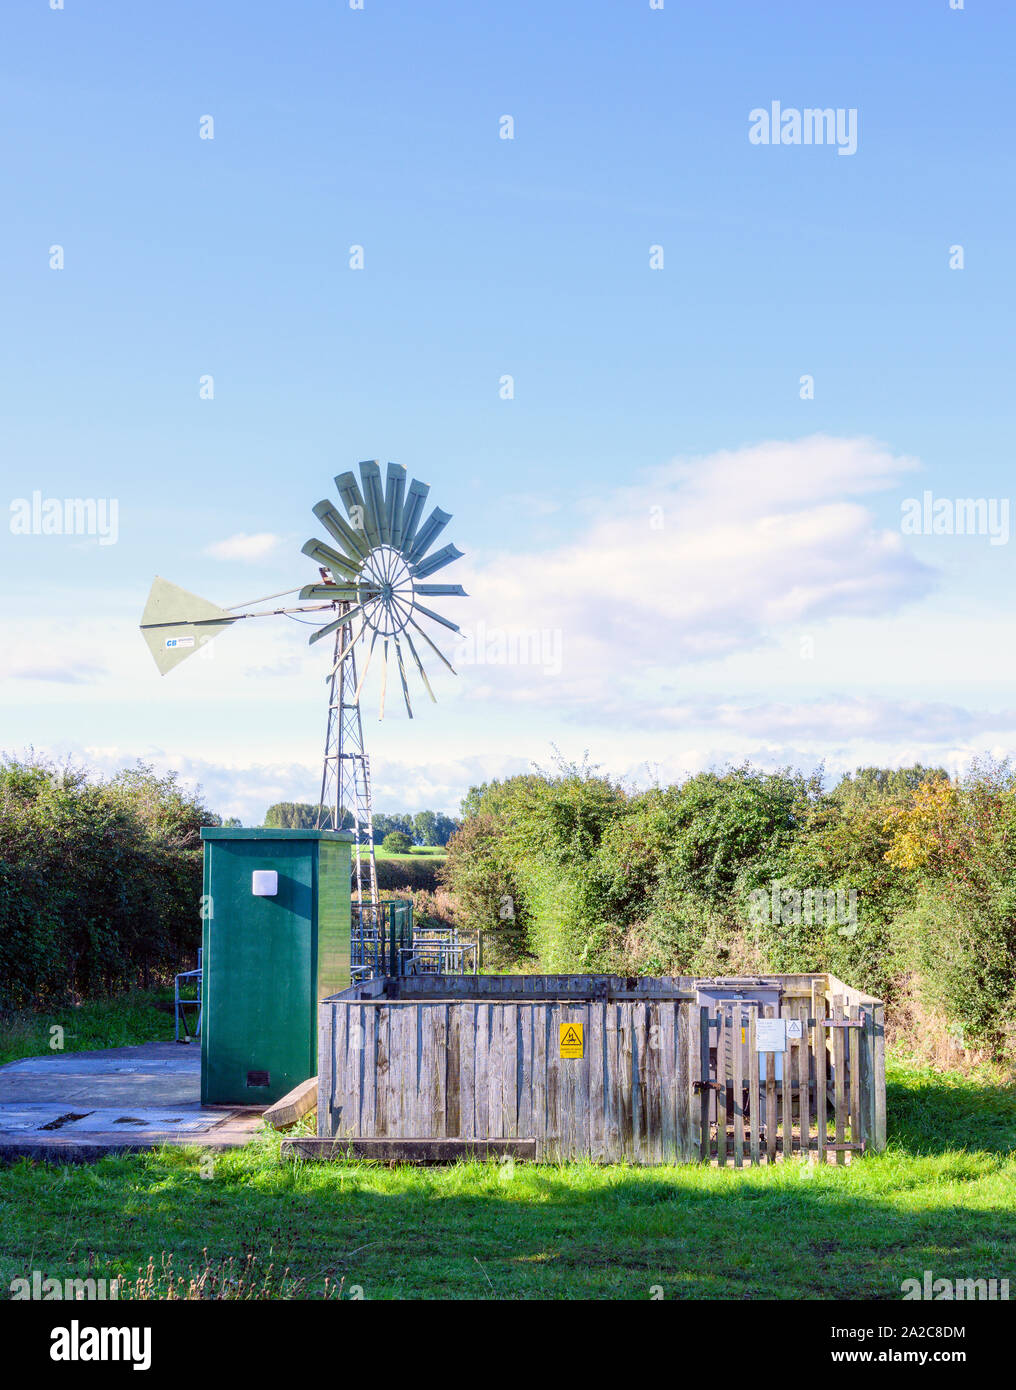 A water pumping station on the outskirts of Lytham St Anne's, Lancashire, UK. The pump runs on electricity generated by a wind turbine Stock Photo